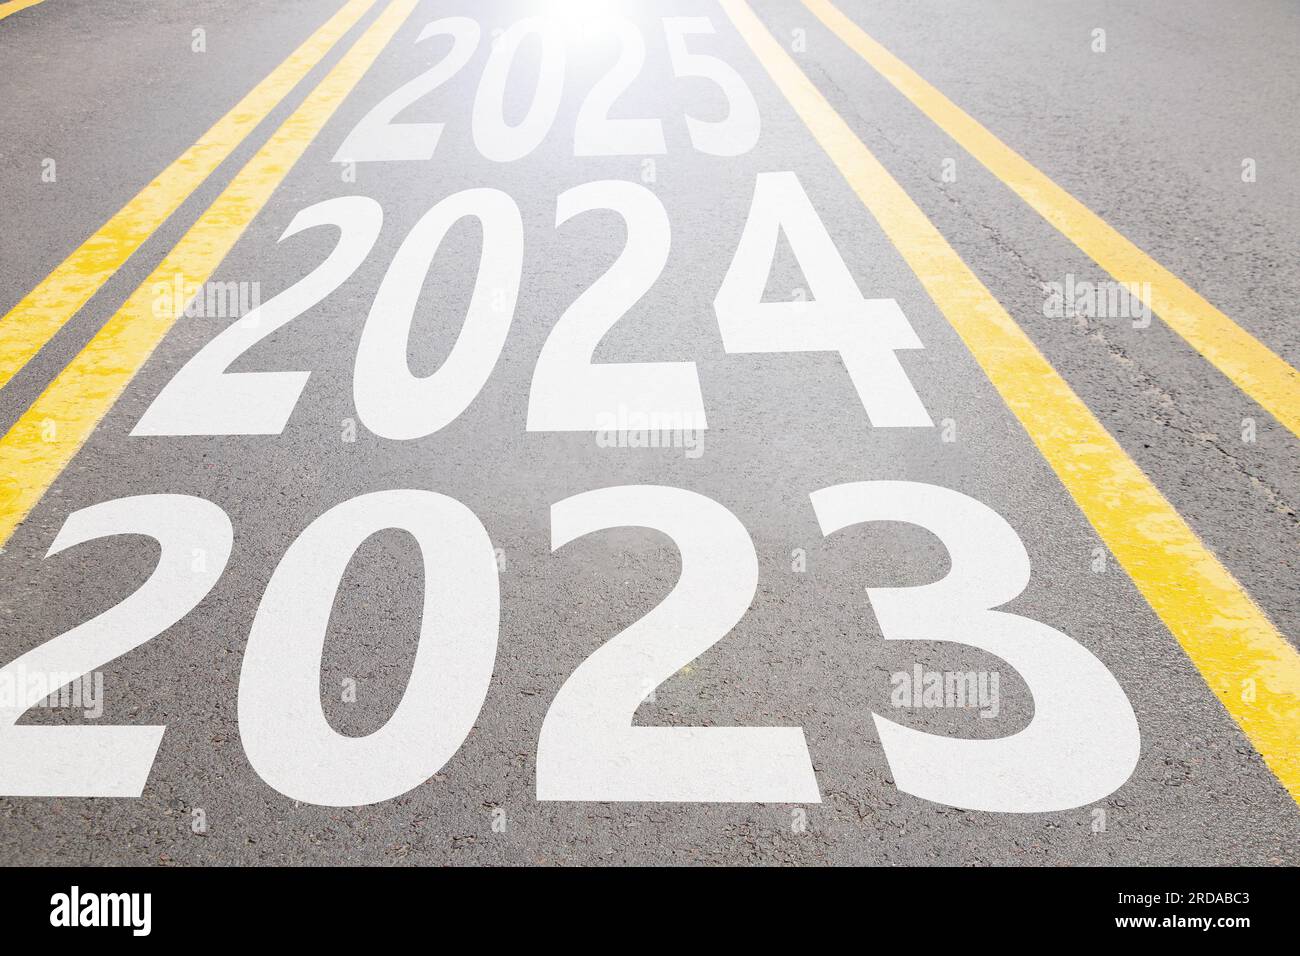 2023 and 2024 and 2025 written on the asphalt road going forward in Ukraine, the beginning of the new year and the way forward, freedom Stock Photo